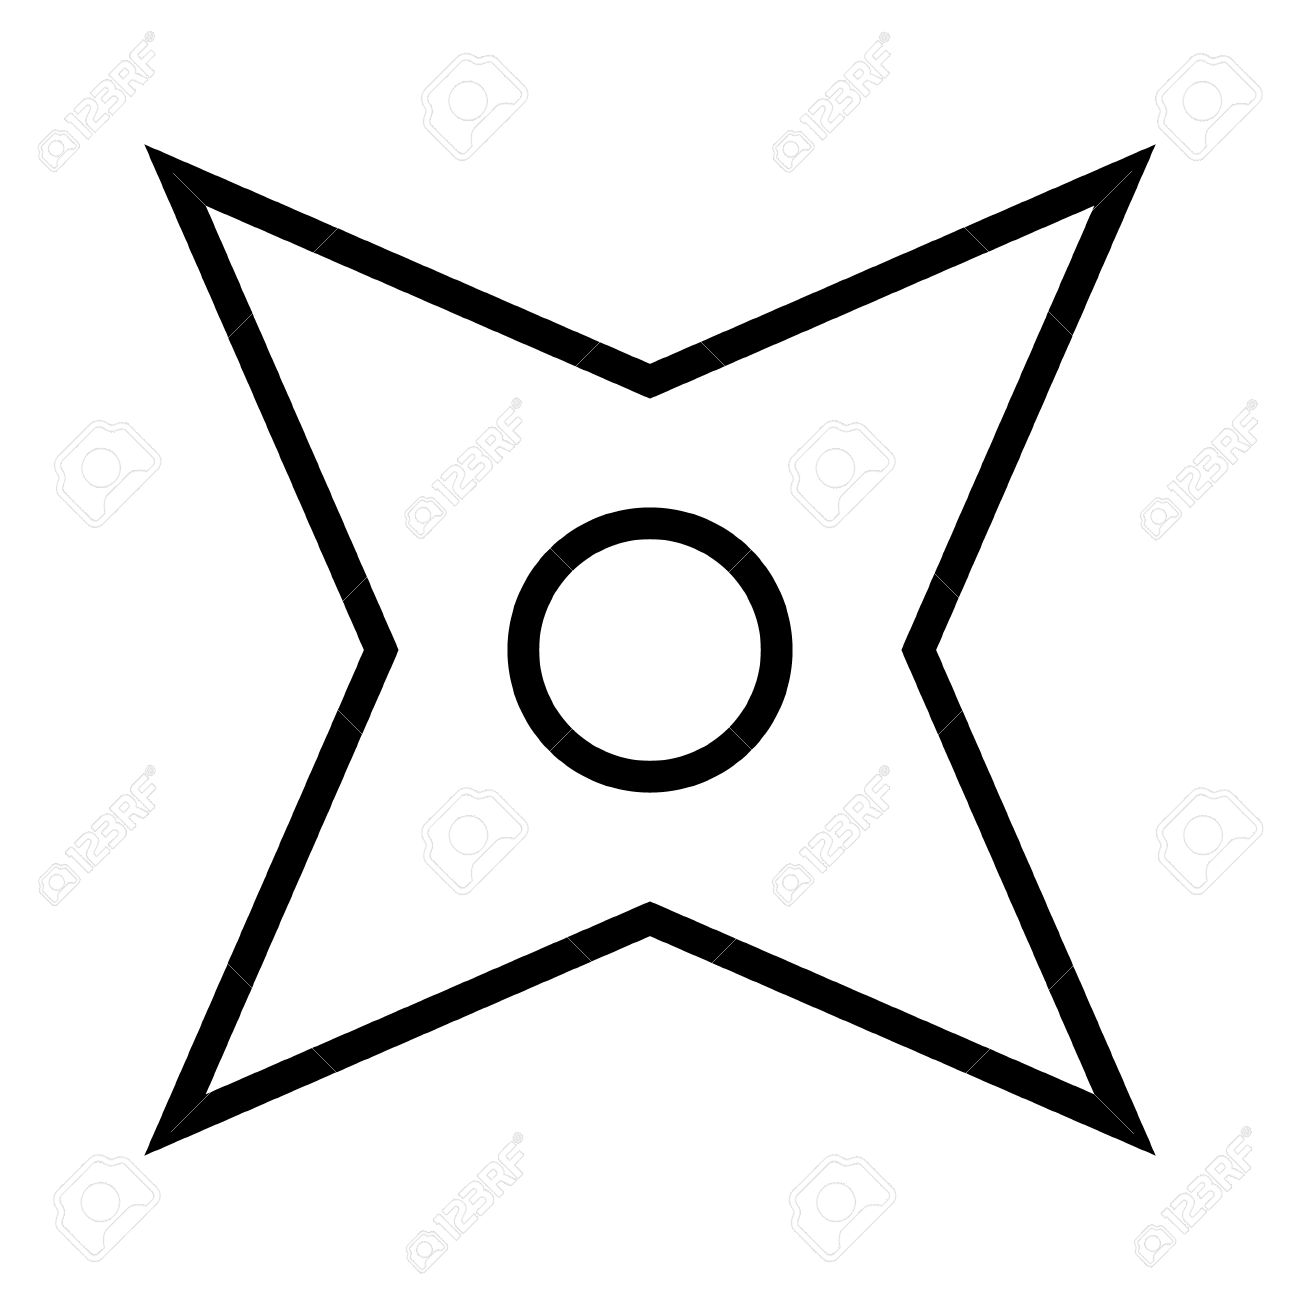 Ninja shuriken throwing star line art icon for games and websites royalty free svg cliparts vectors and stock illustration image